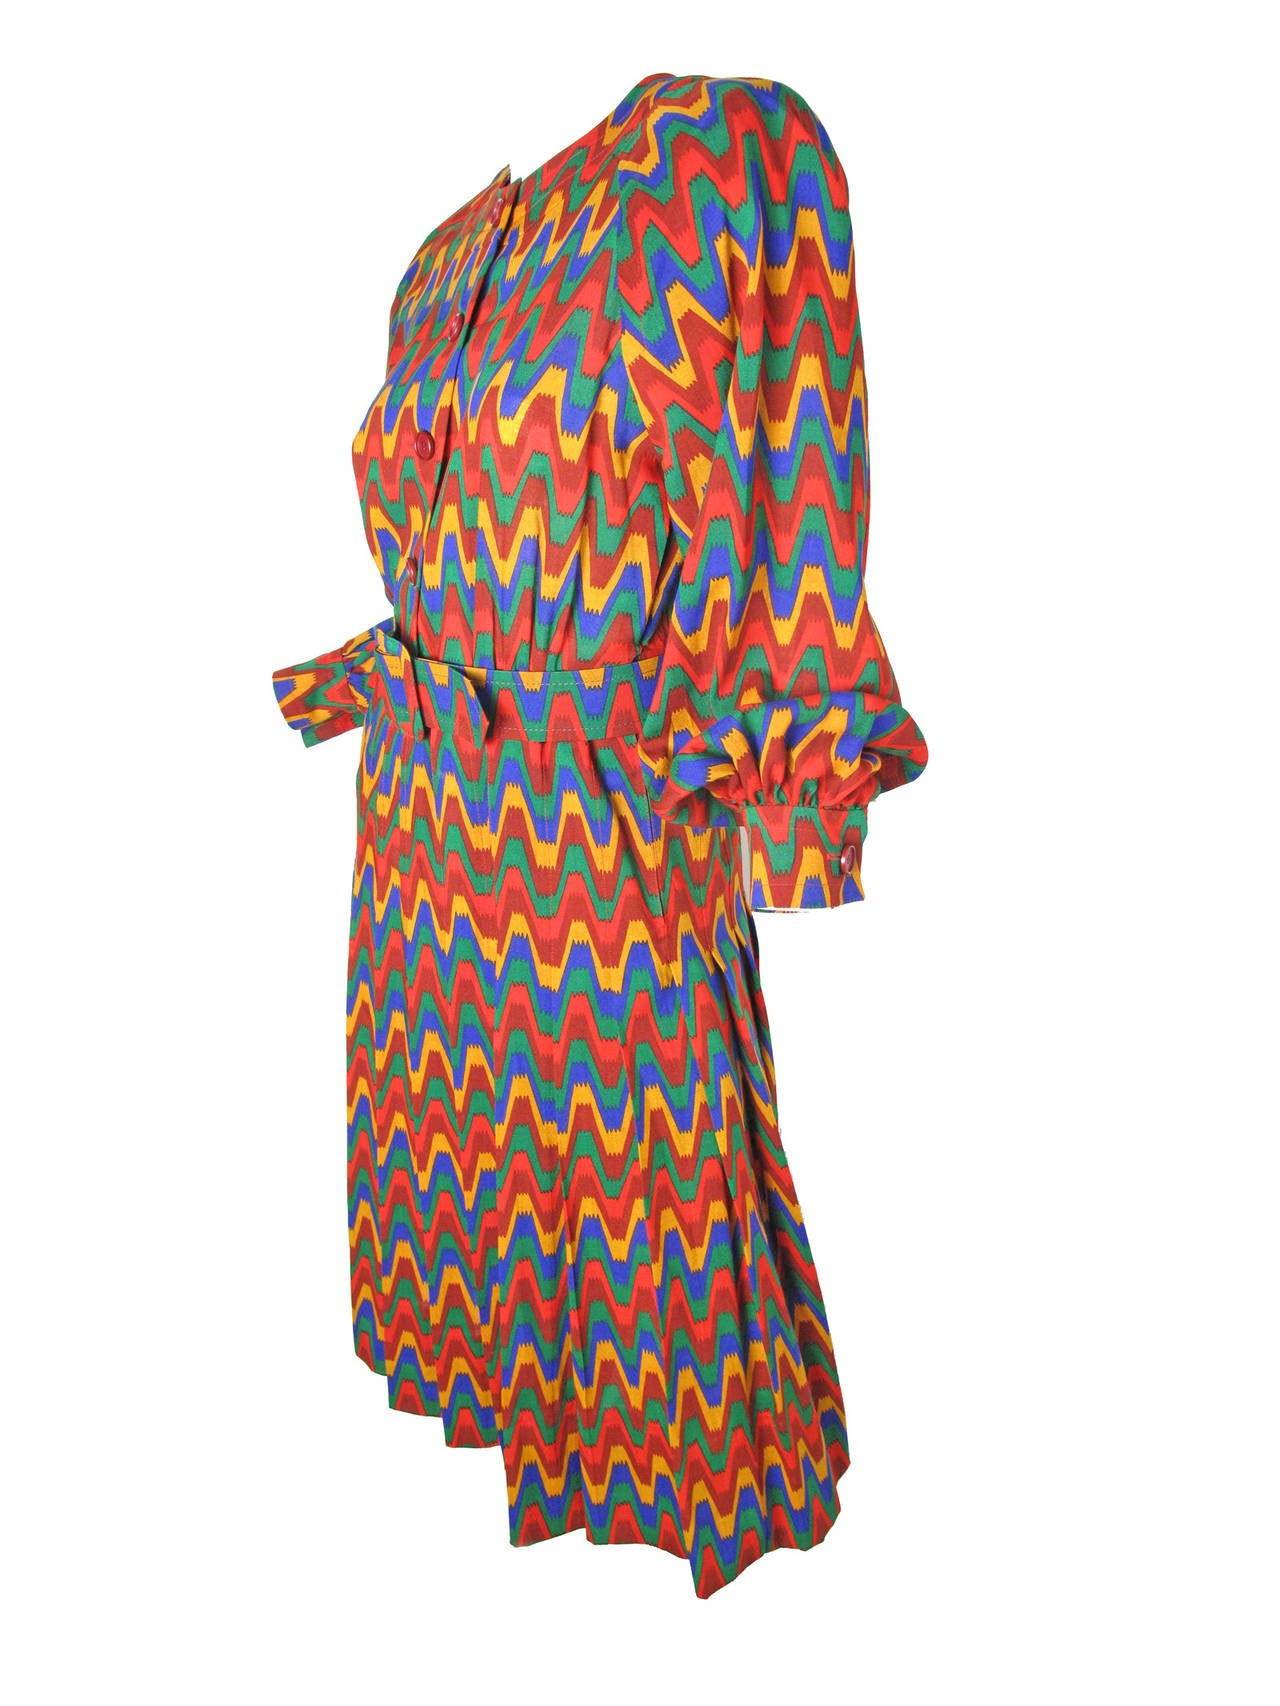 1980s Givenchy multi-colored light wool dress - red, green, blue, yellow, green.  Buttons down front, removable belt, pleated from waist to hem. 
Condition: Very good, small hole has been repaired. 36